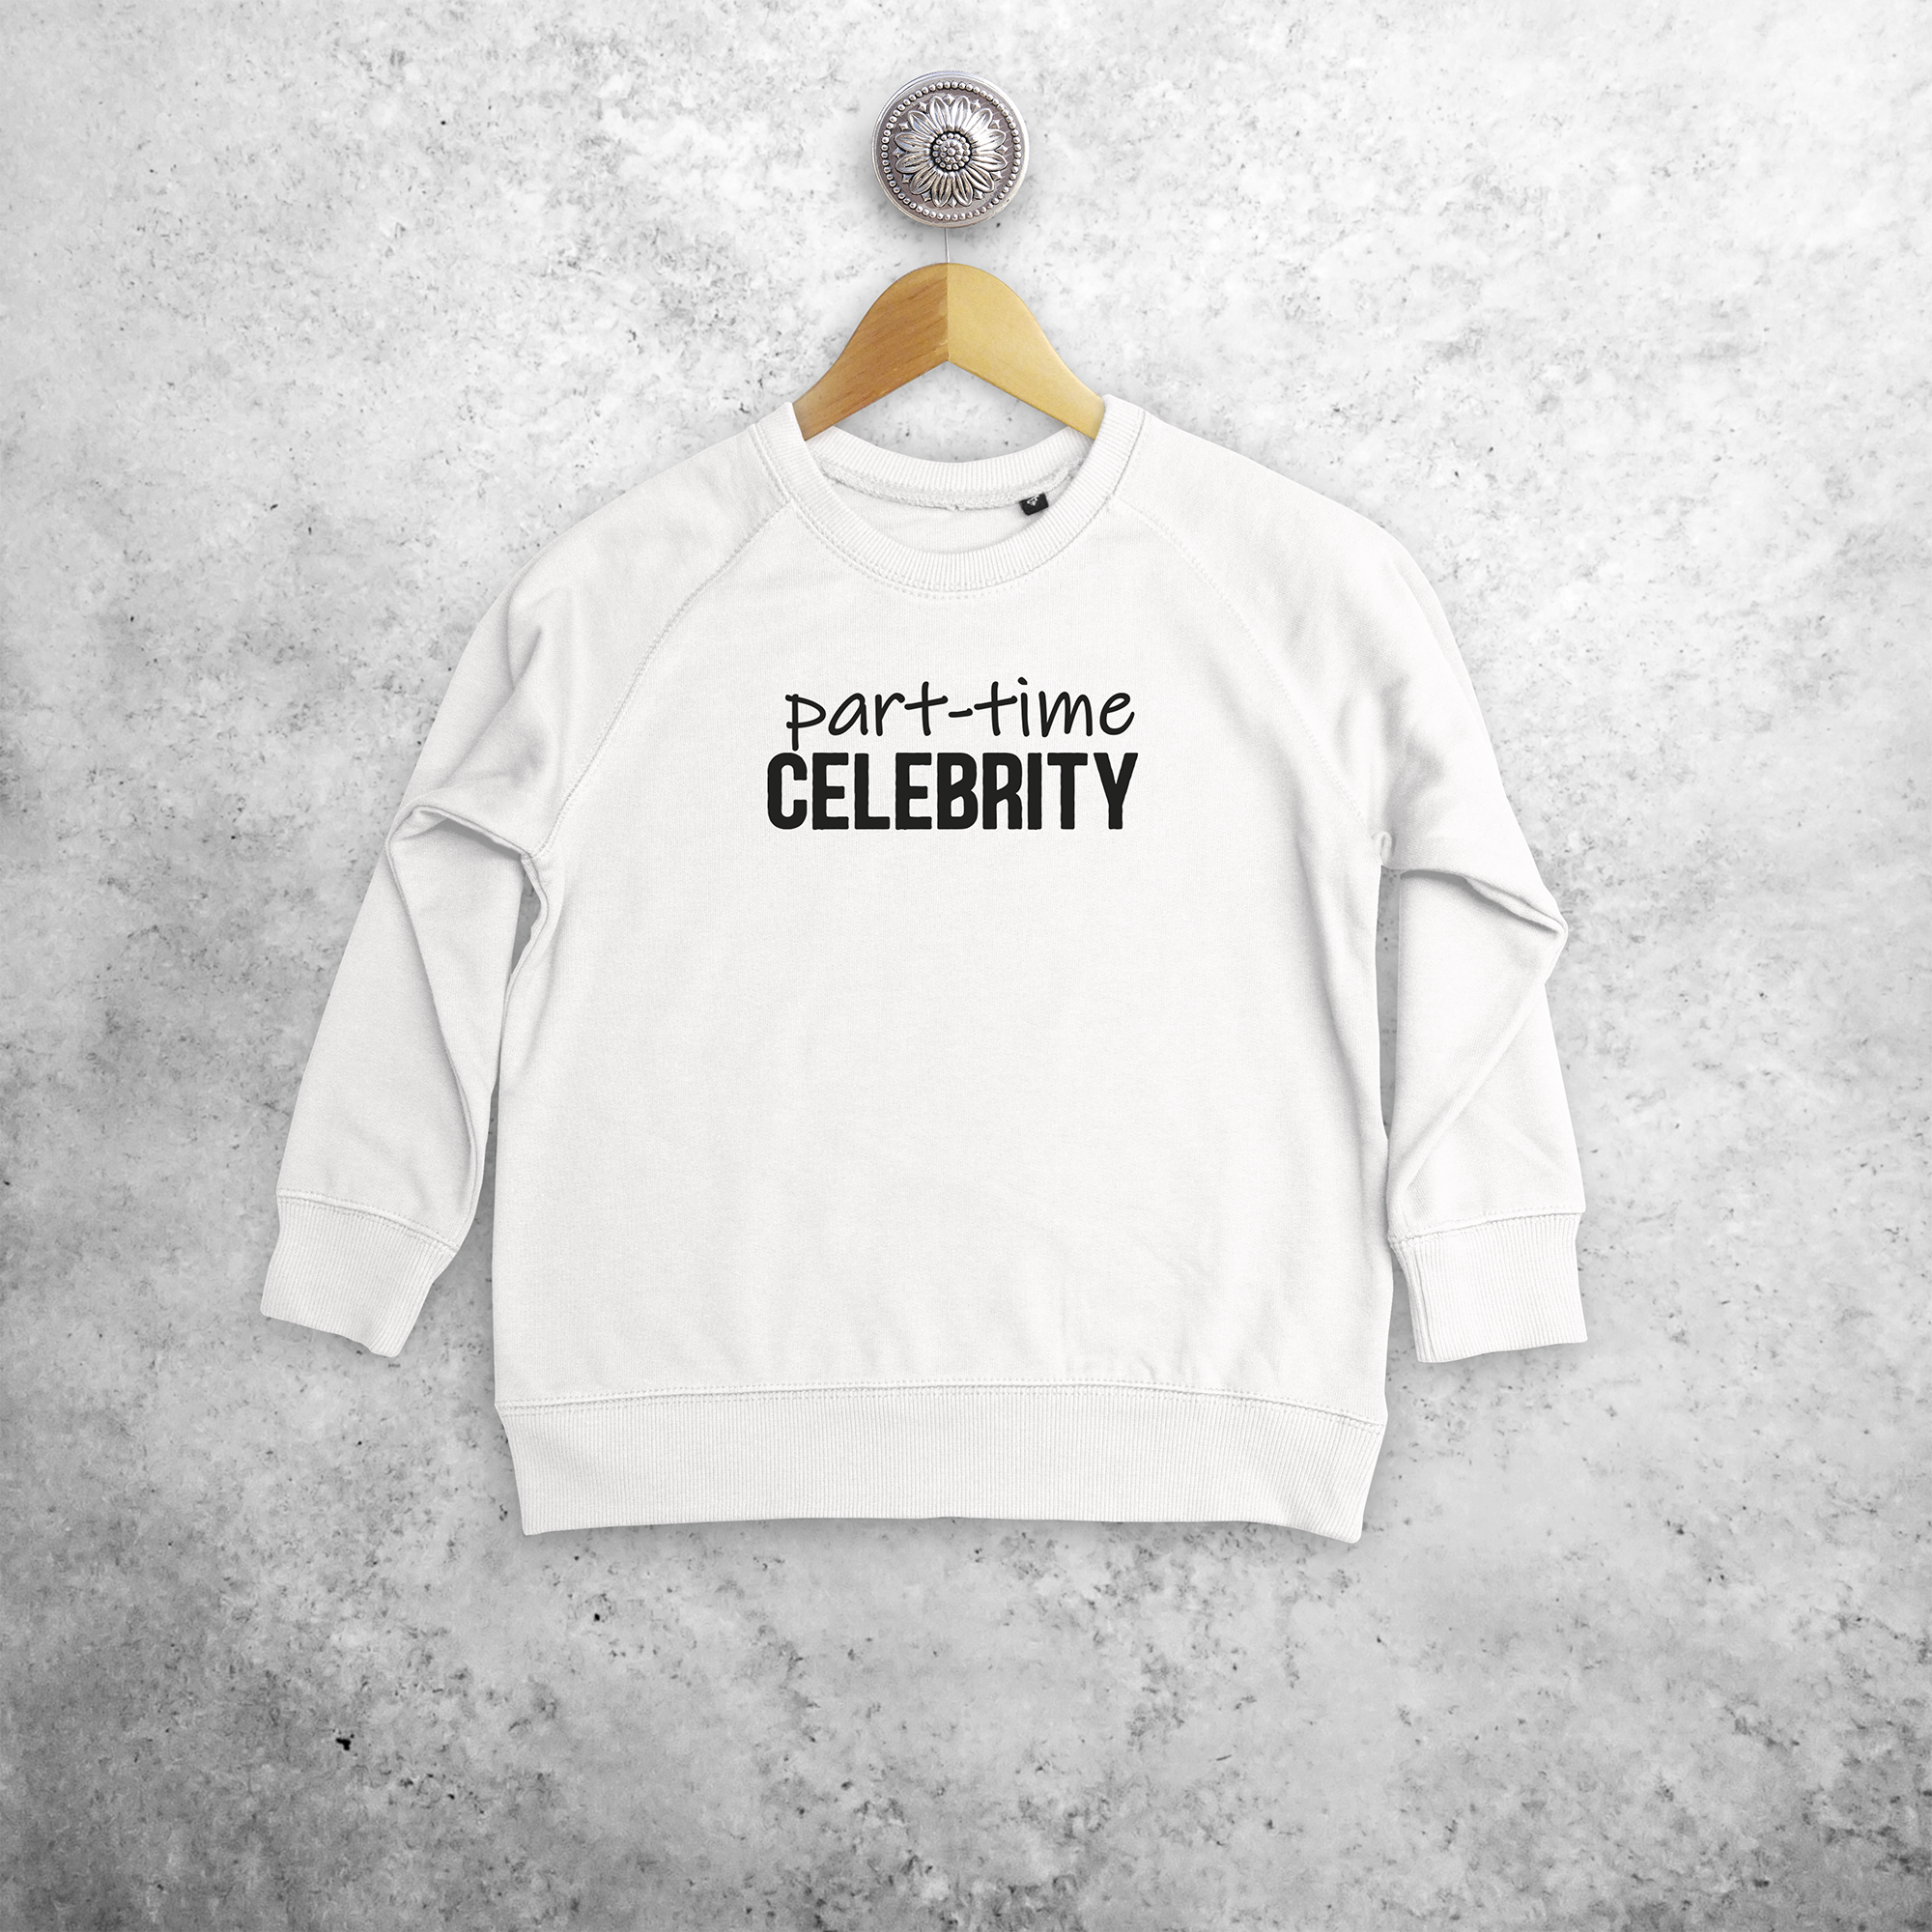 'Part-time celebrity' kids sweater